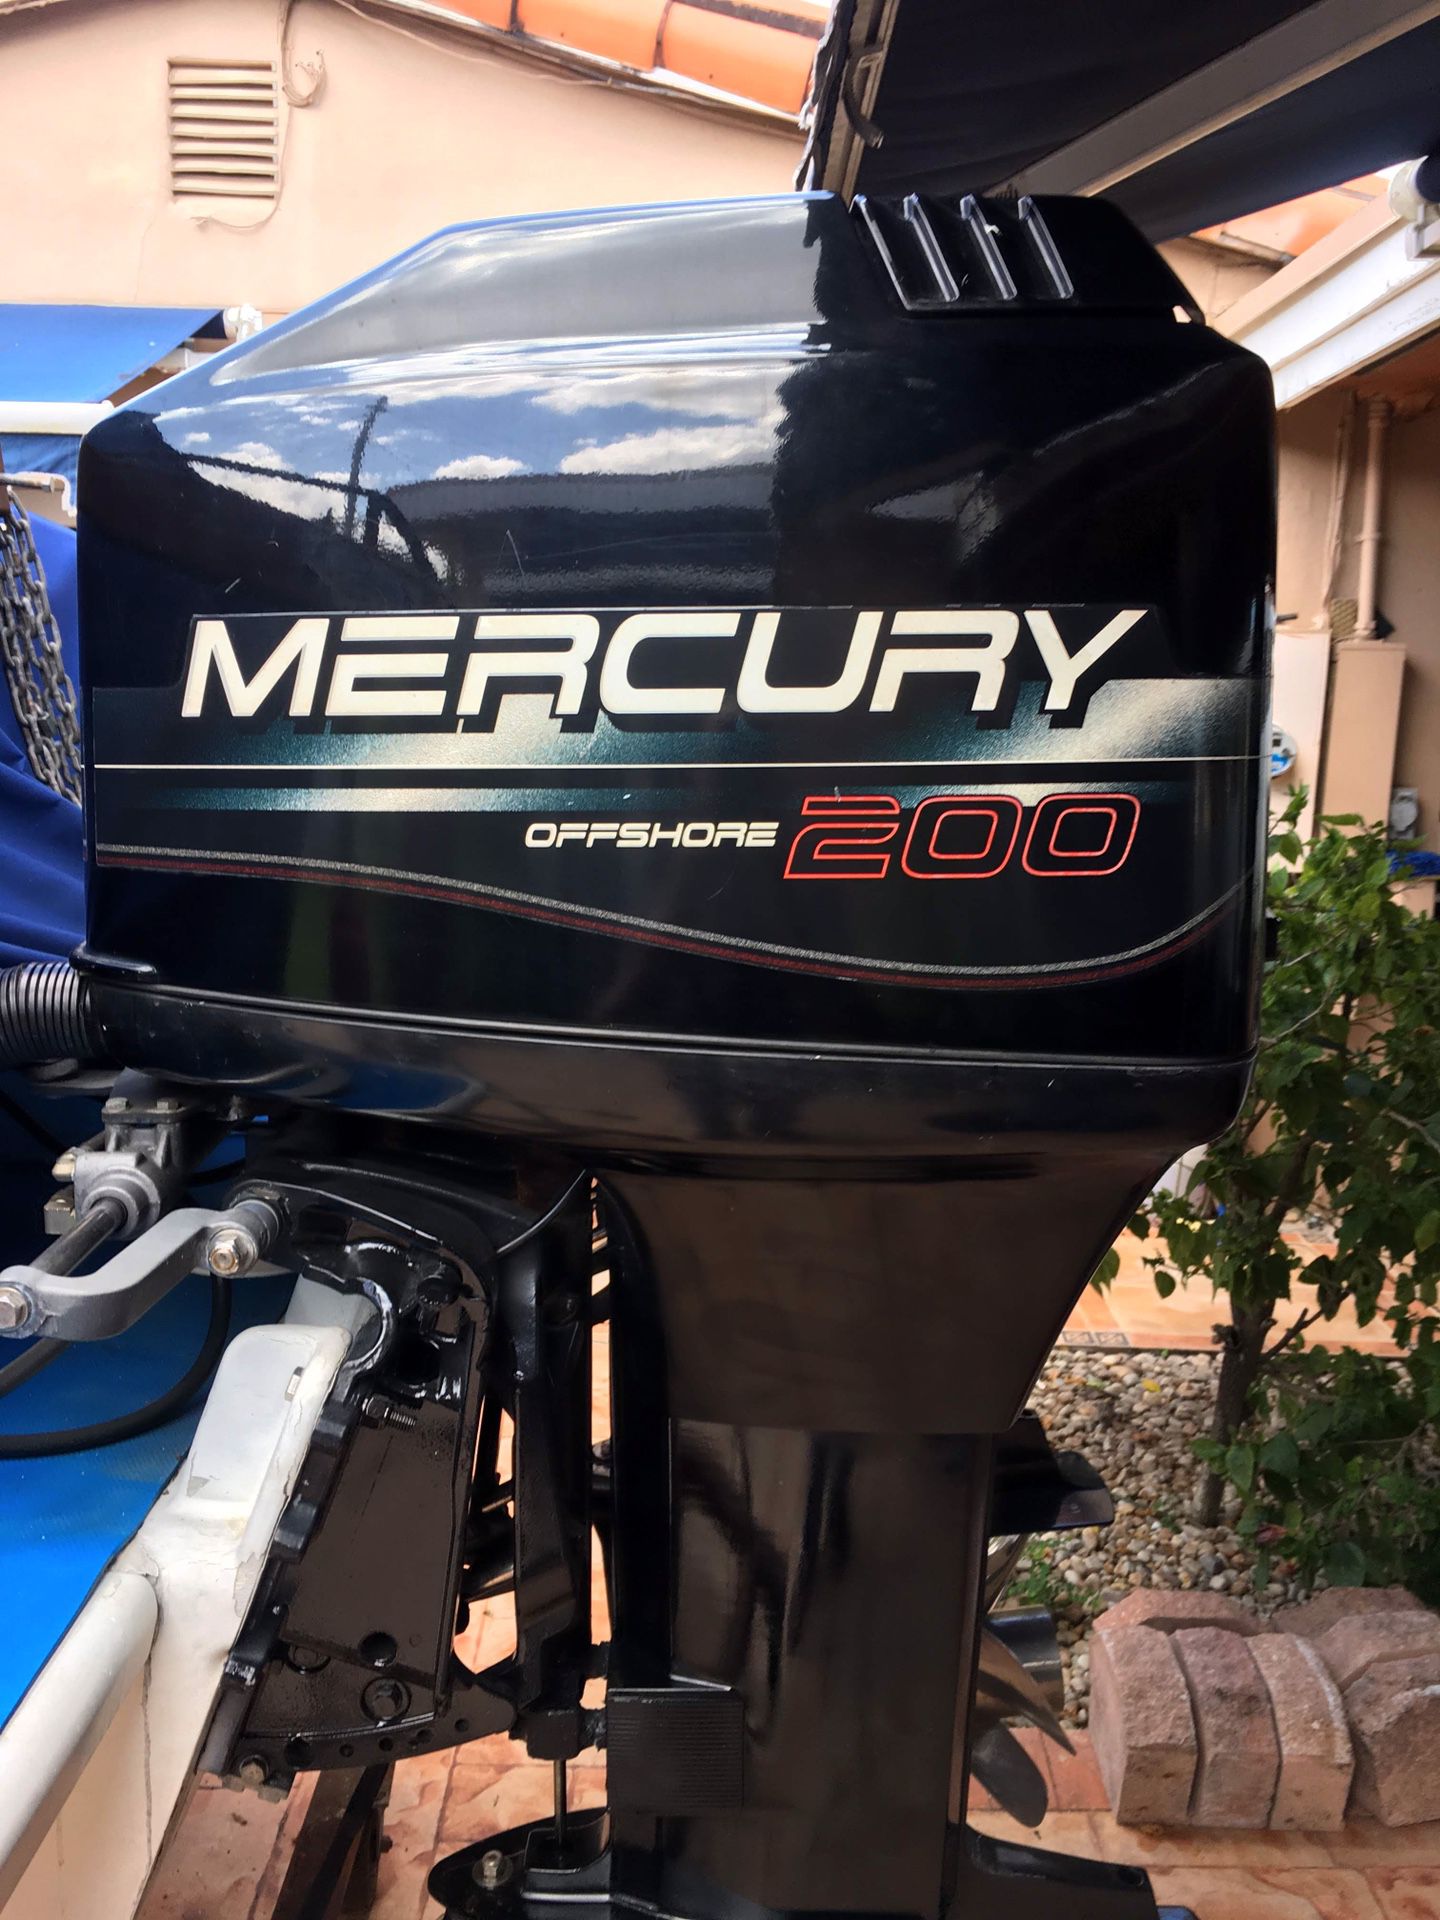 Matching pair of 1996 Mercury 200hp offshore carburated